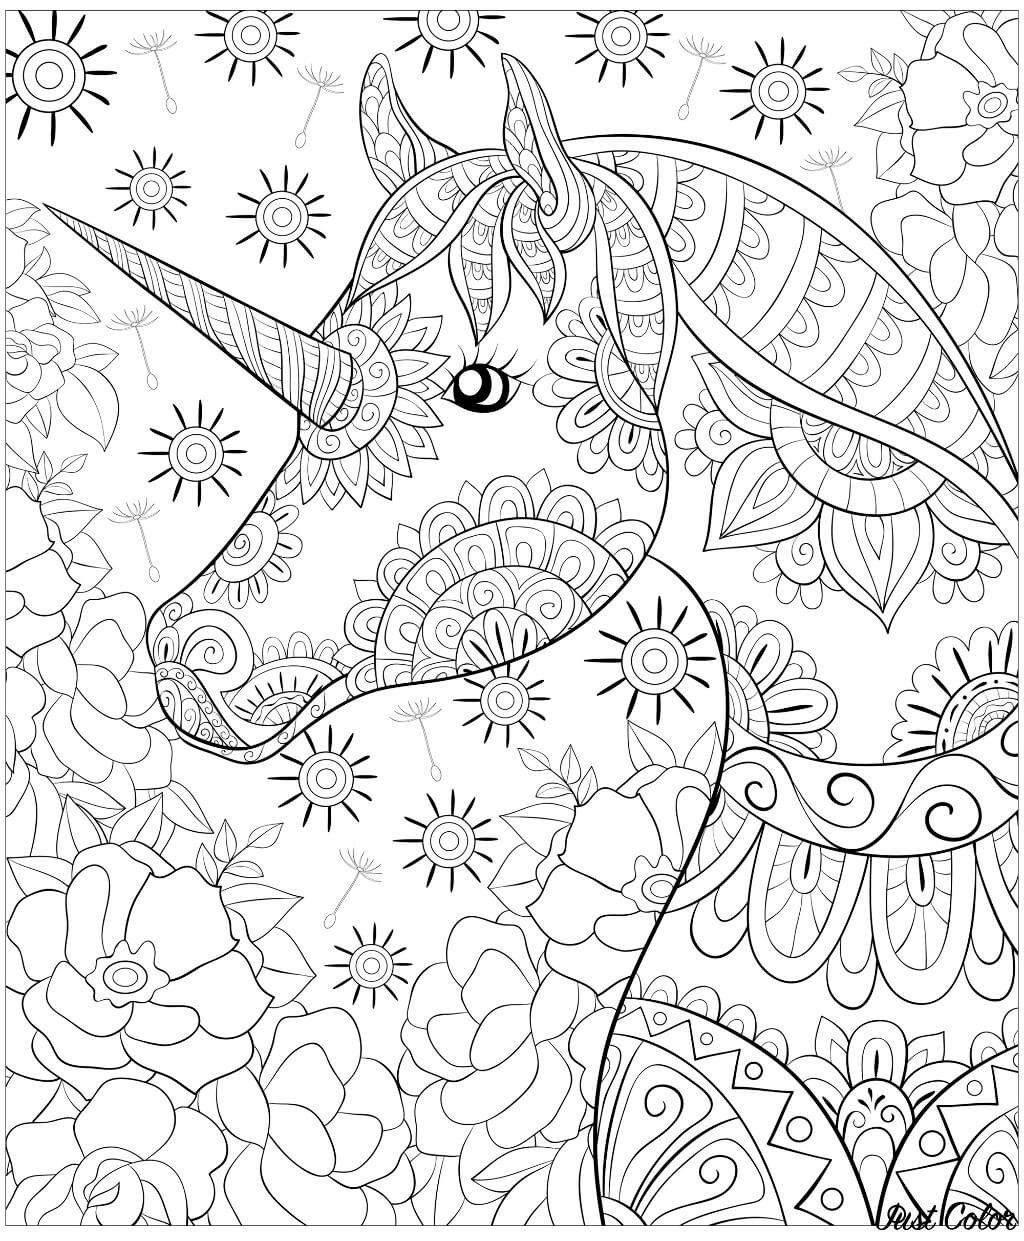 free printable unicorn coloring pages for adults | unicorn coloring pages for adults | best free coloring app for adults